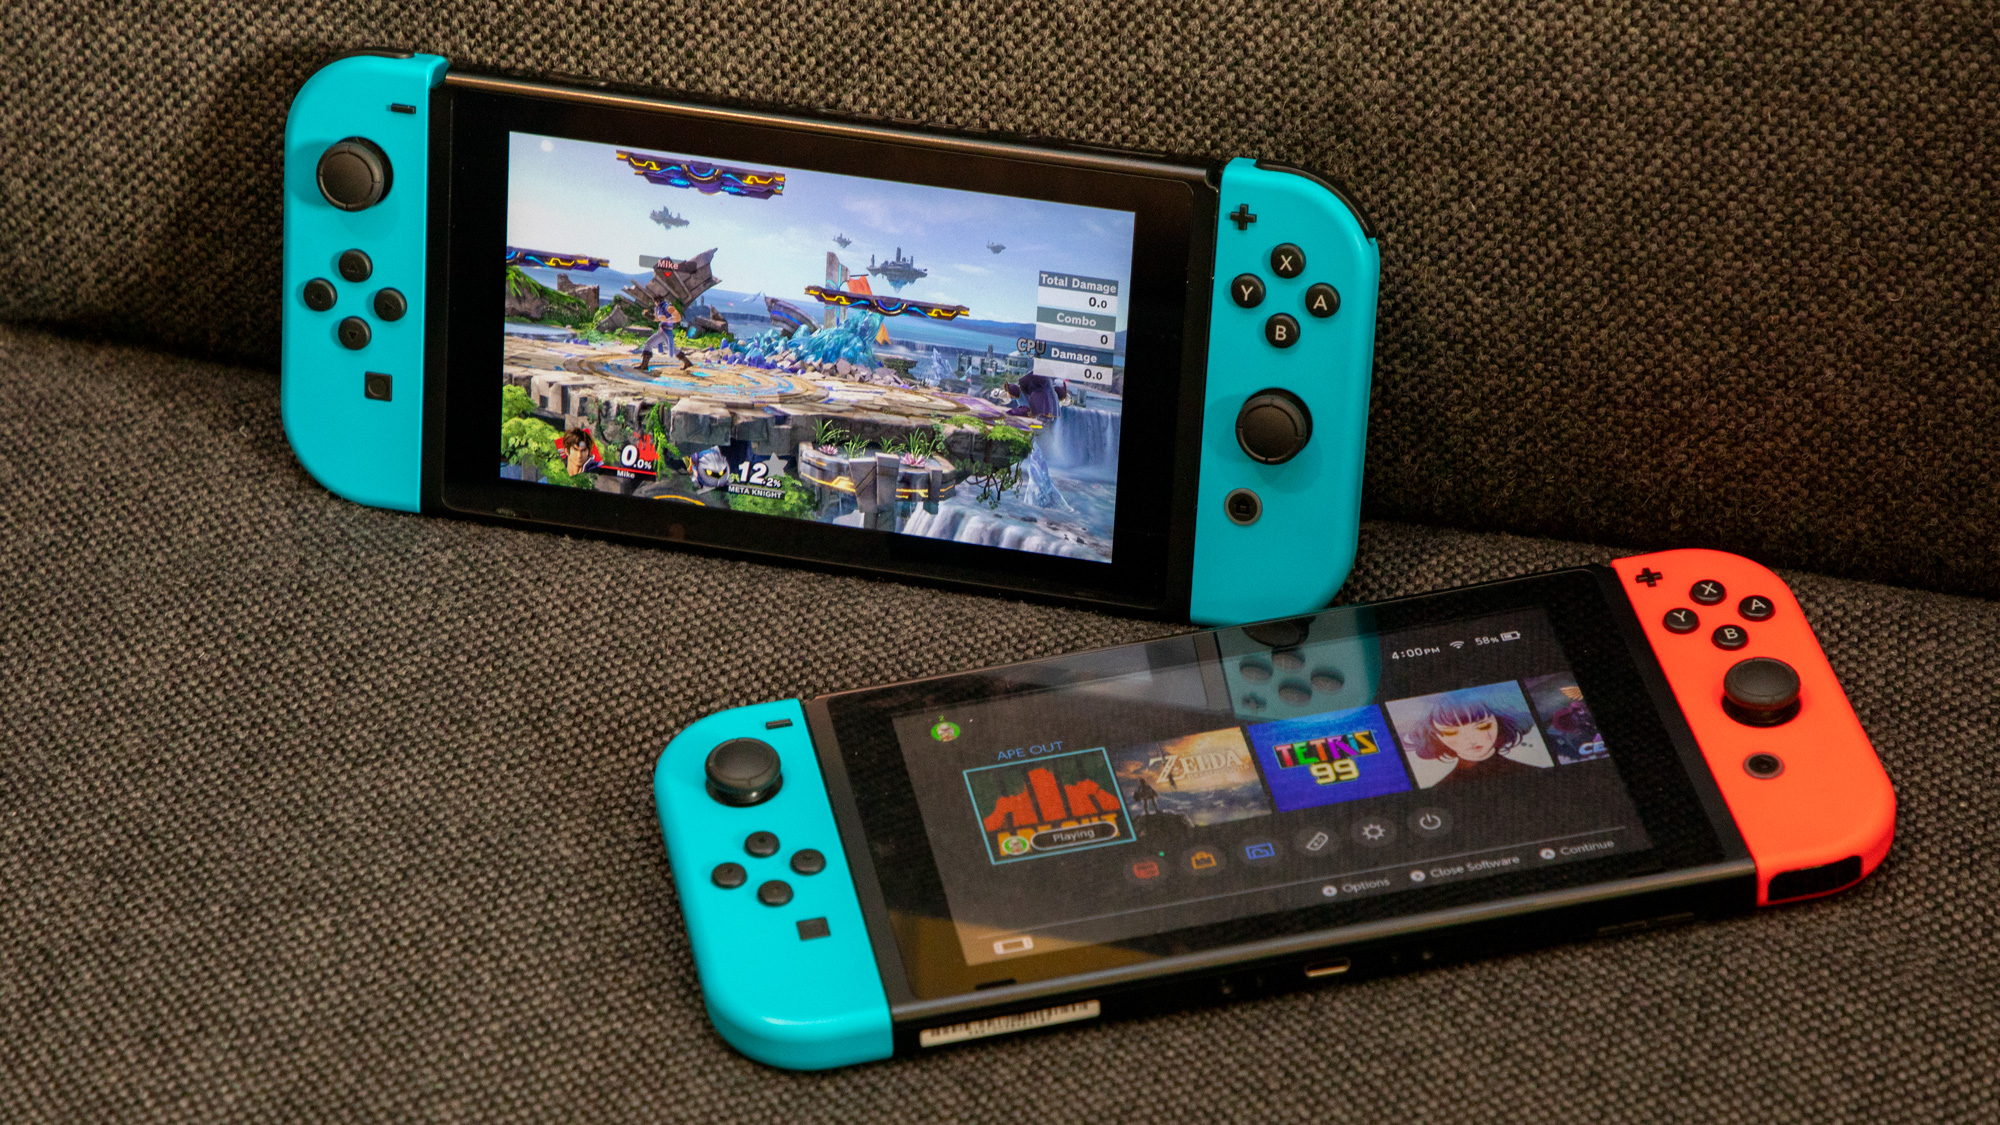 is it worth to buy nintendo switch in 2019